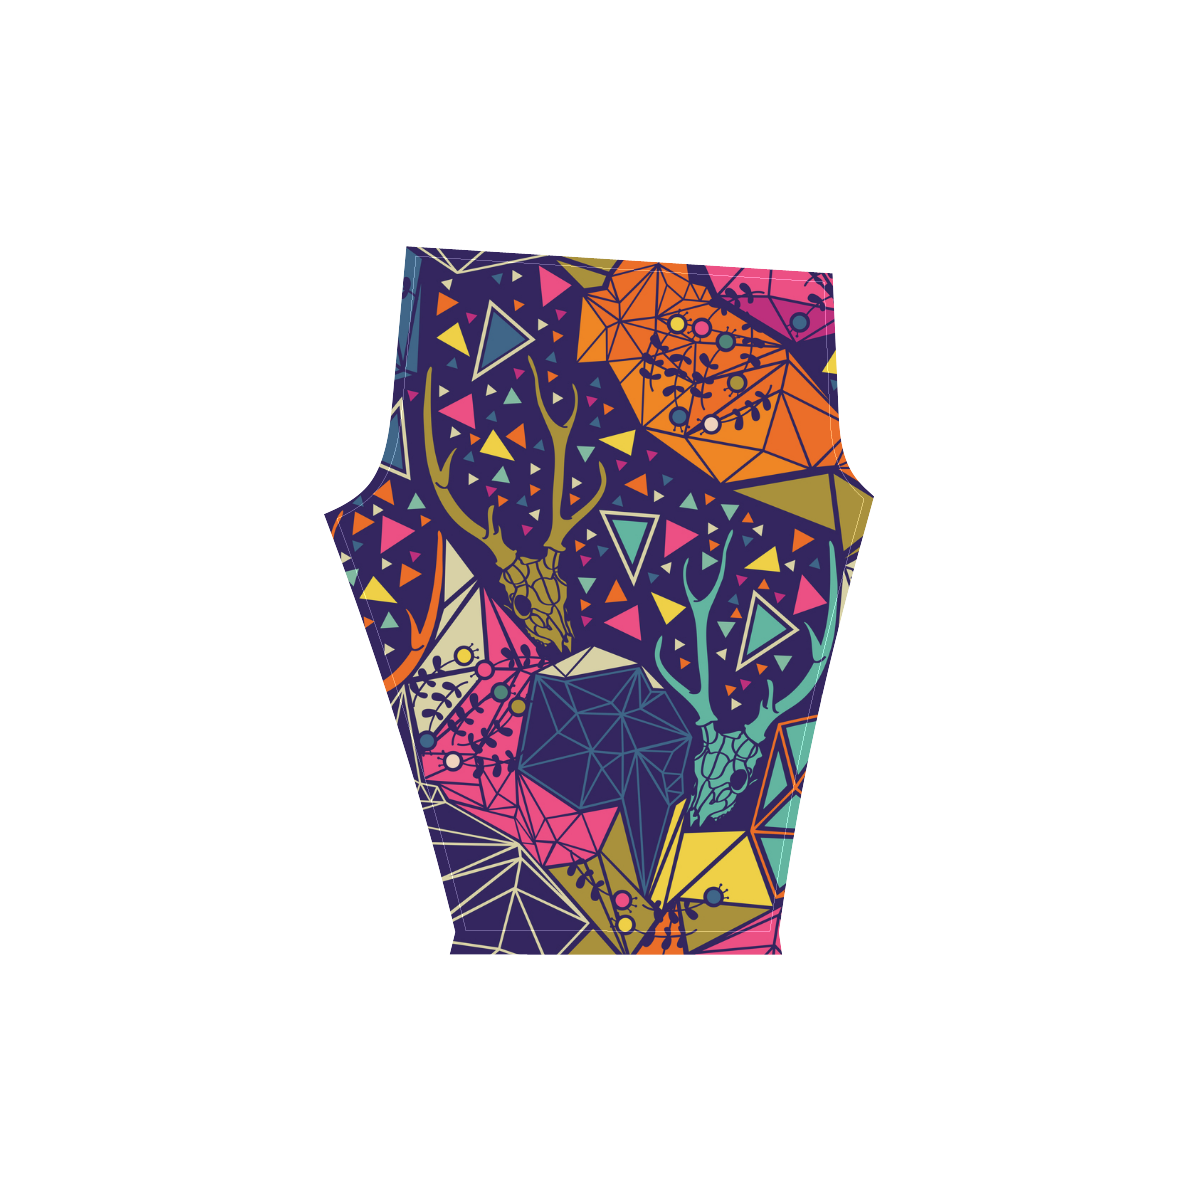 Skull with Floral and Polygonal Ornament Women's Low Rise Capri Leggings (Invisible Stitch) (Model L08)